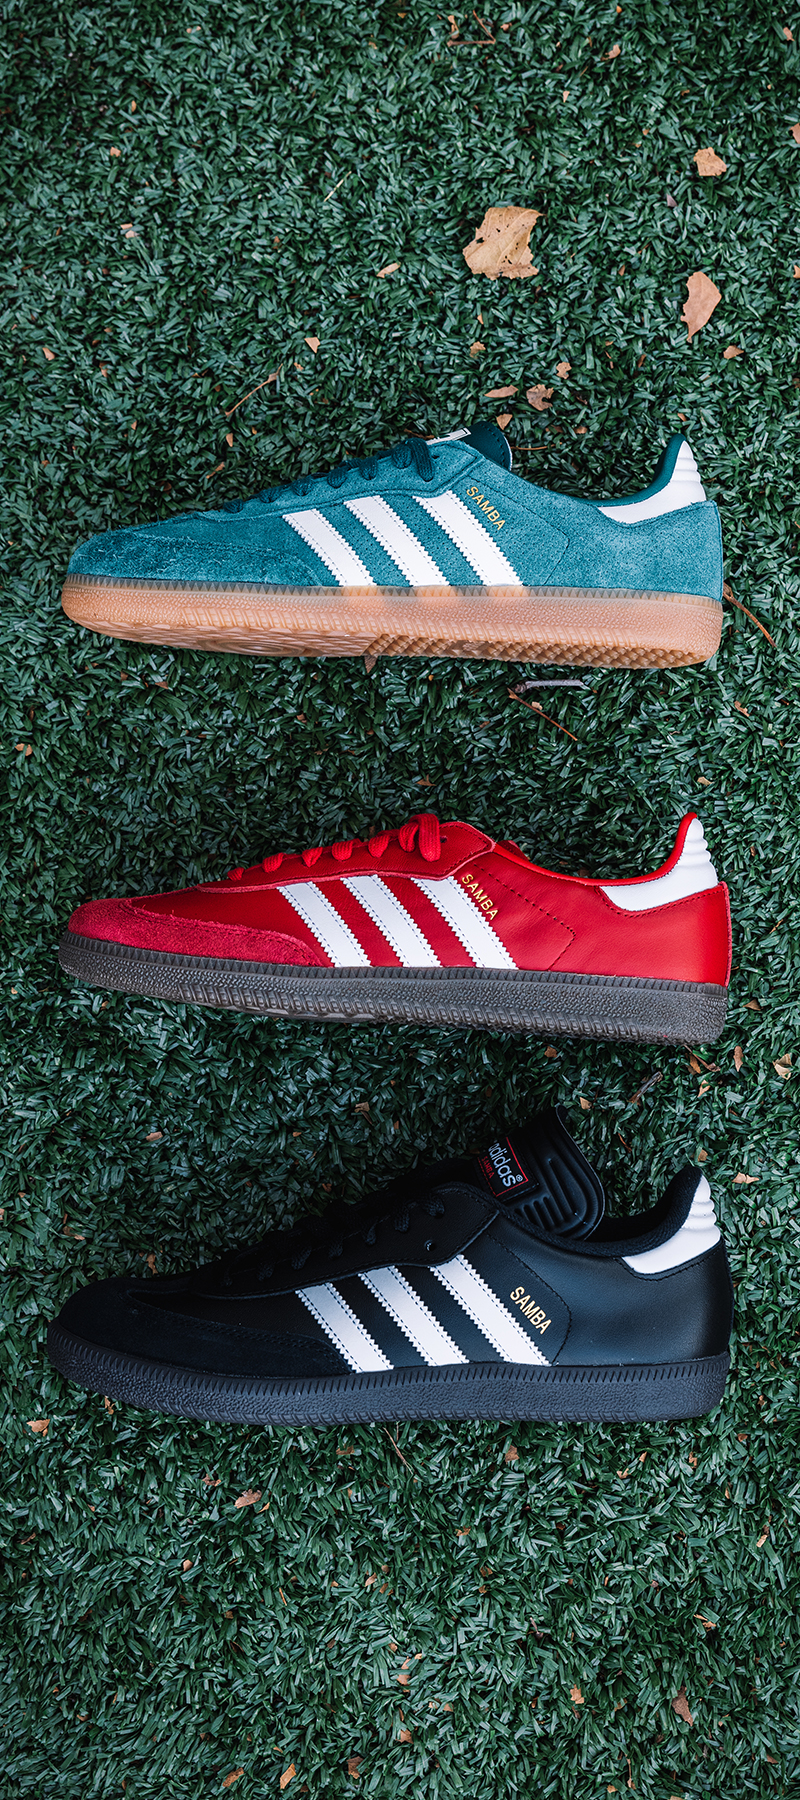 An icon of street style. These classic colorways of the #adidas Samba OG  are dropping SOON at #FootLockerPH.